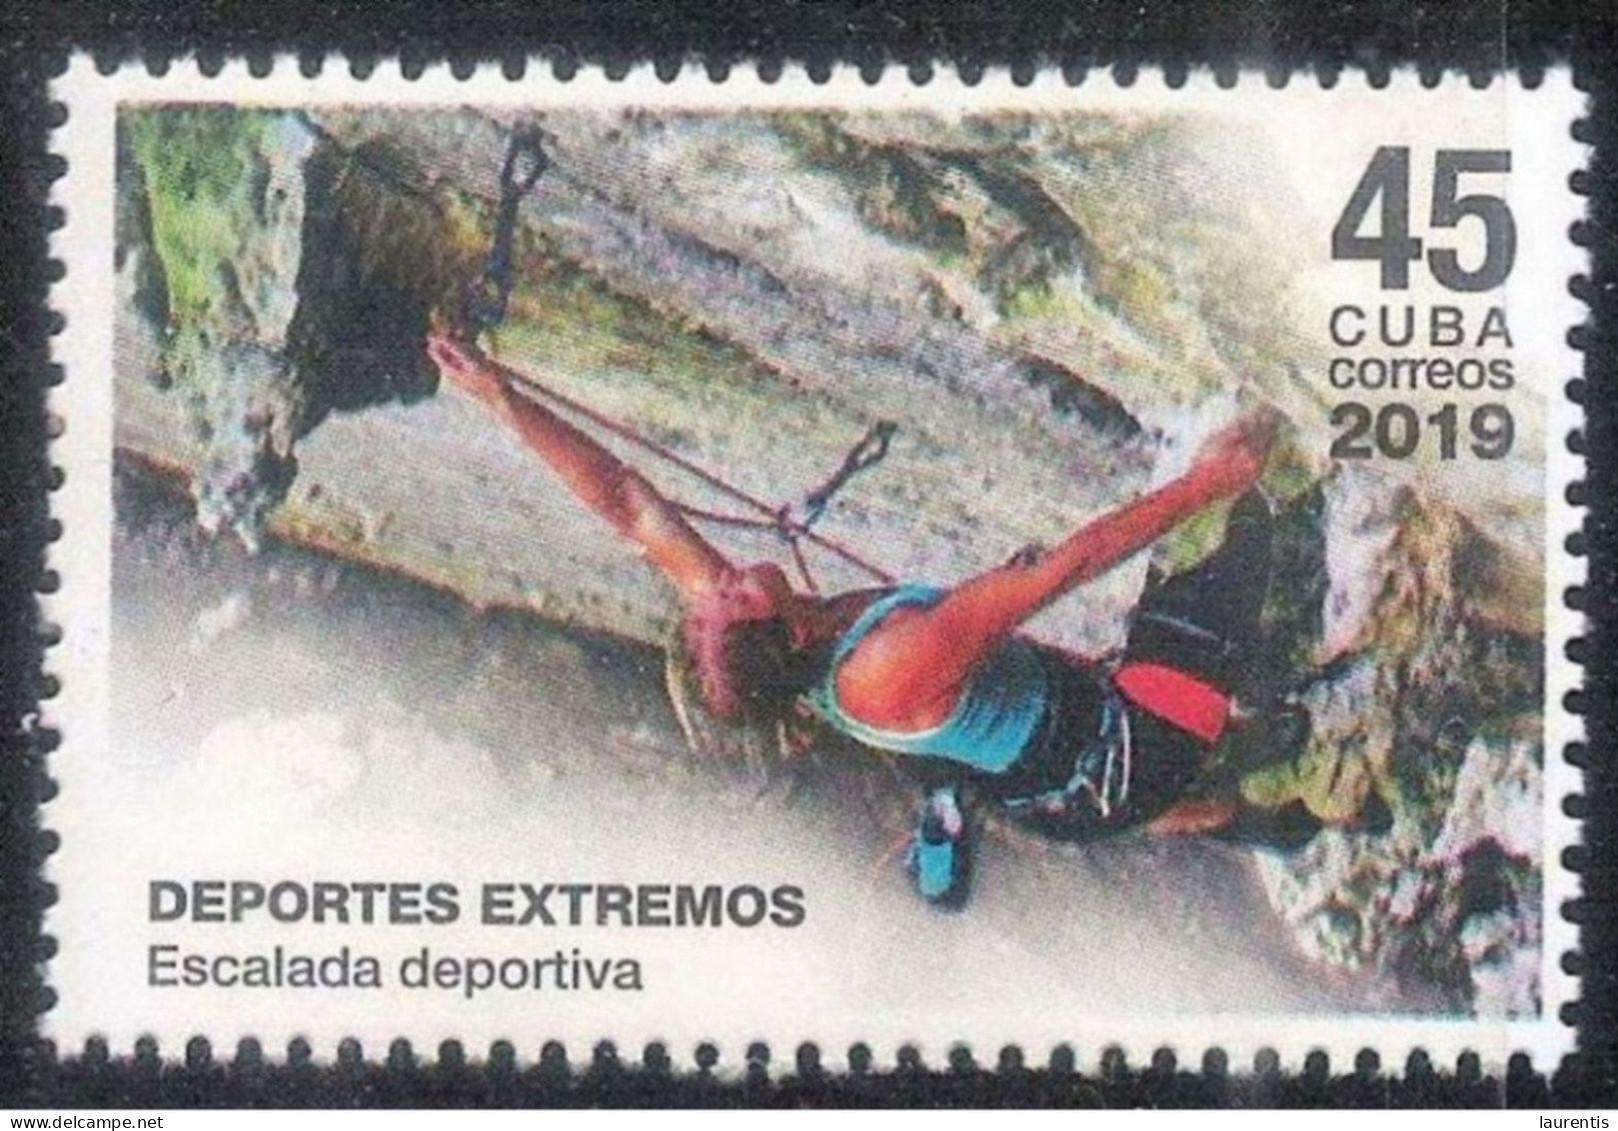 1253  Climbing - Only This One In The Stamp Set - MNH - Cb - 1,25 - Escalade